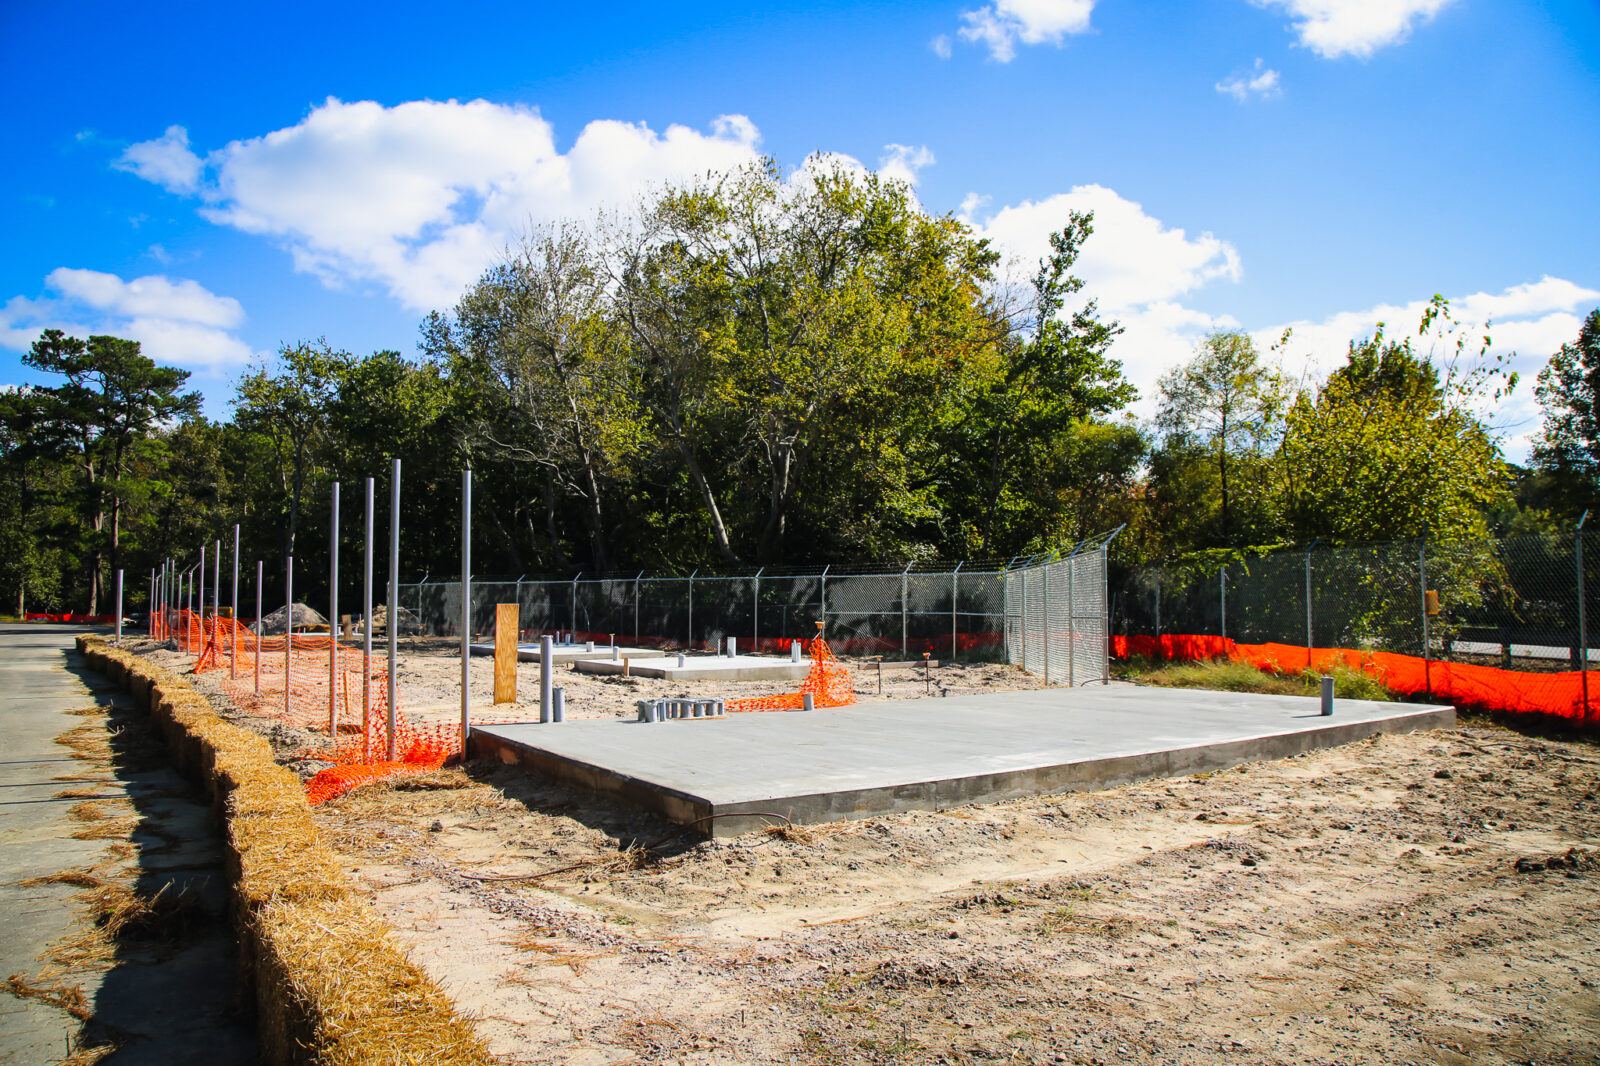 Concrete pad in construction zone with orange fencing around the area